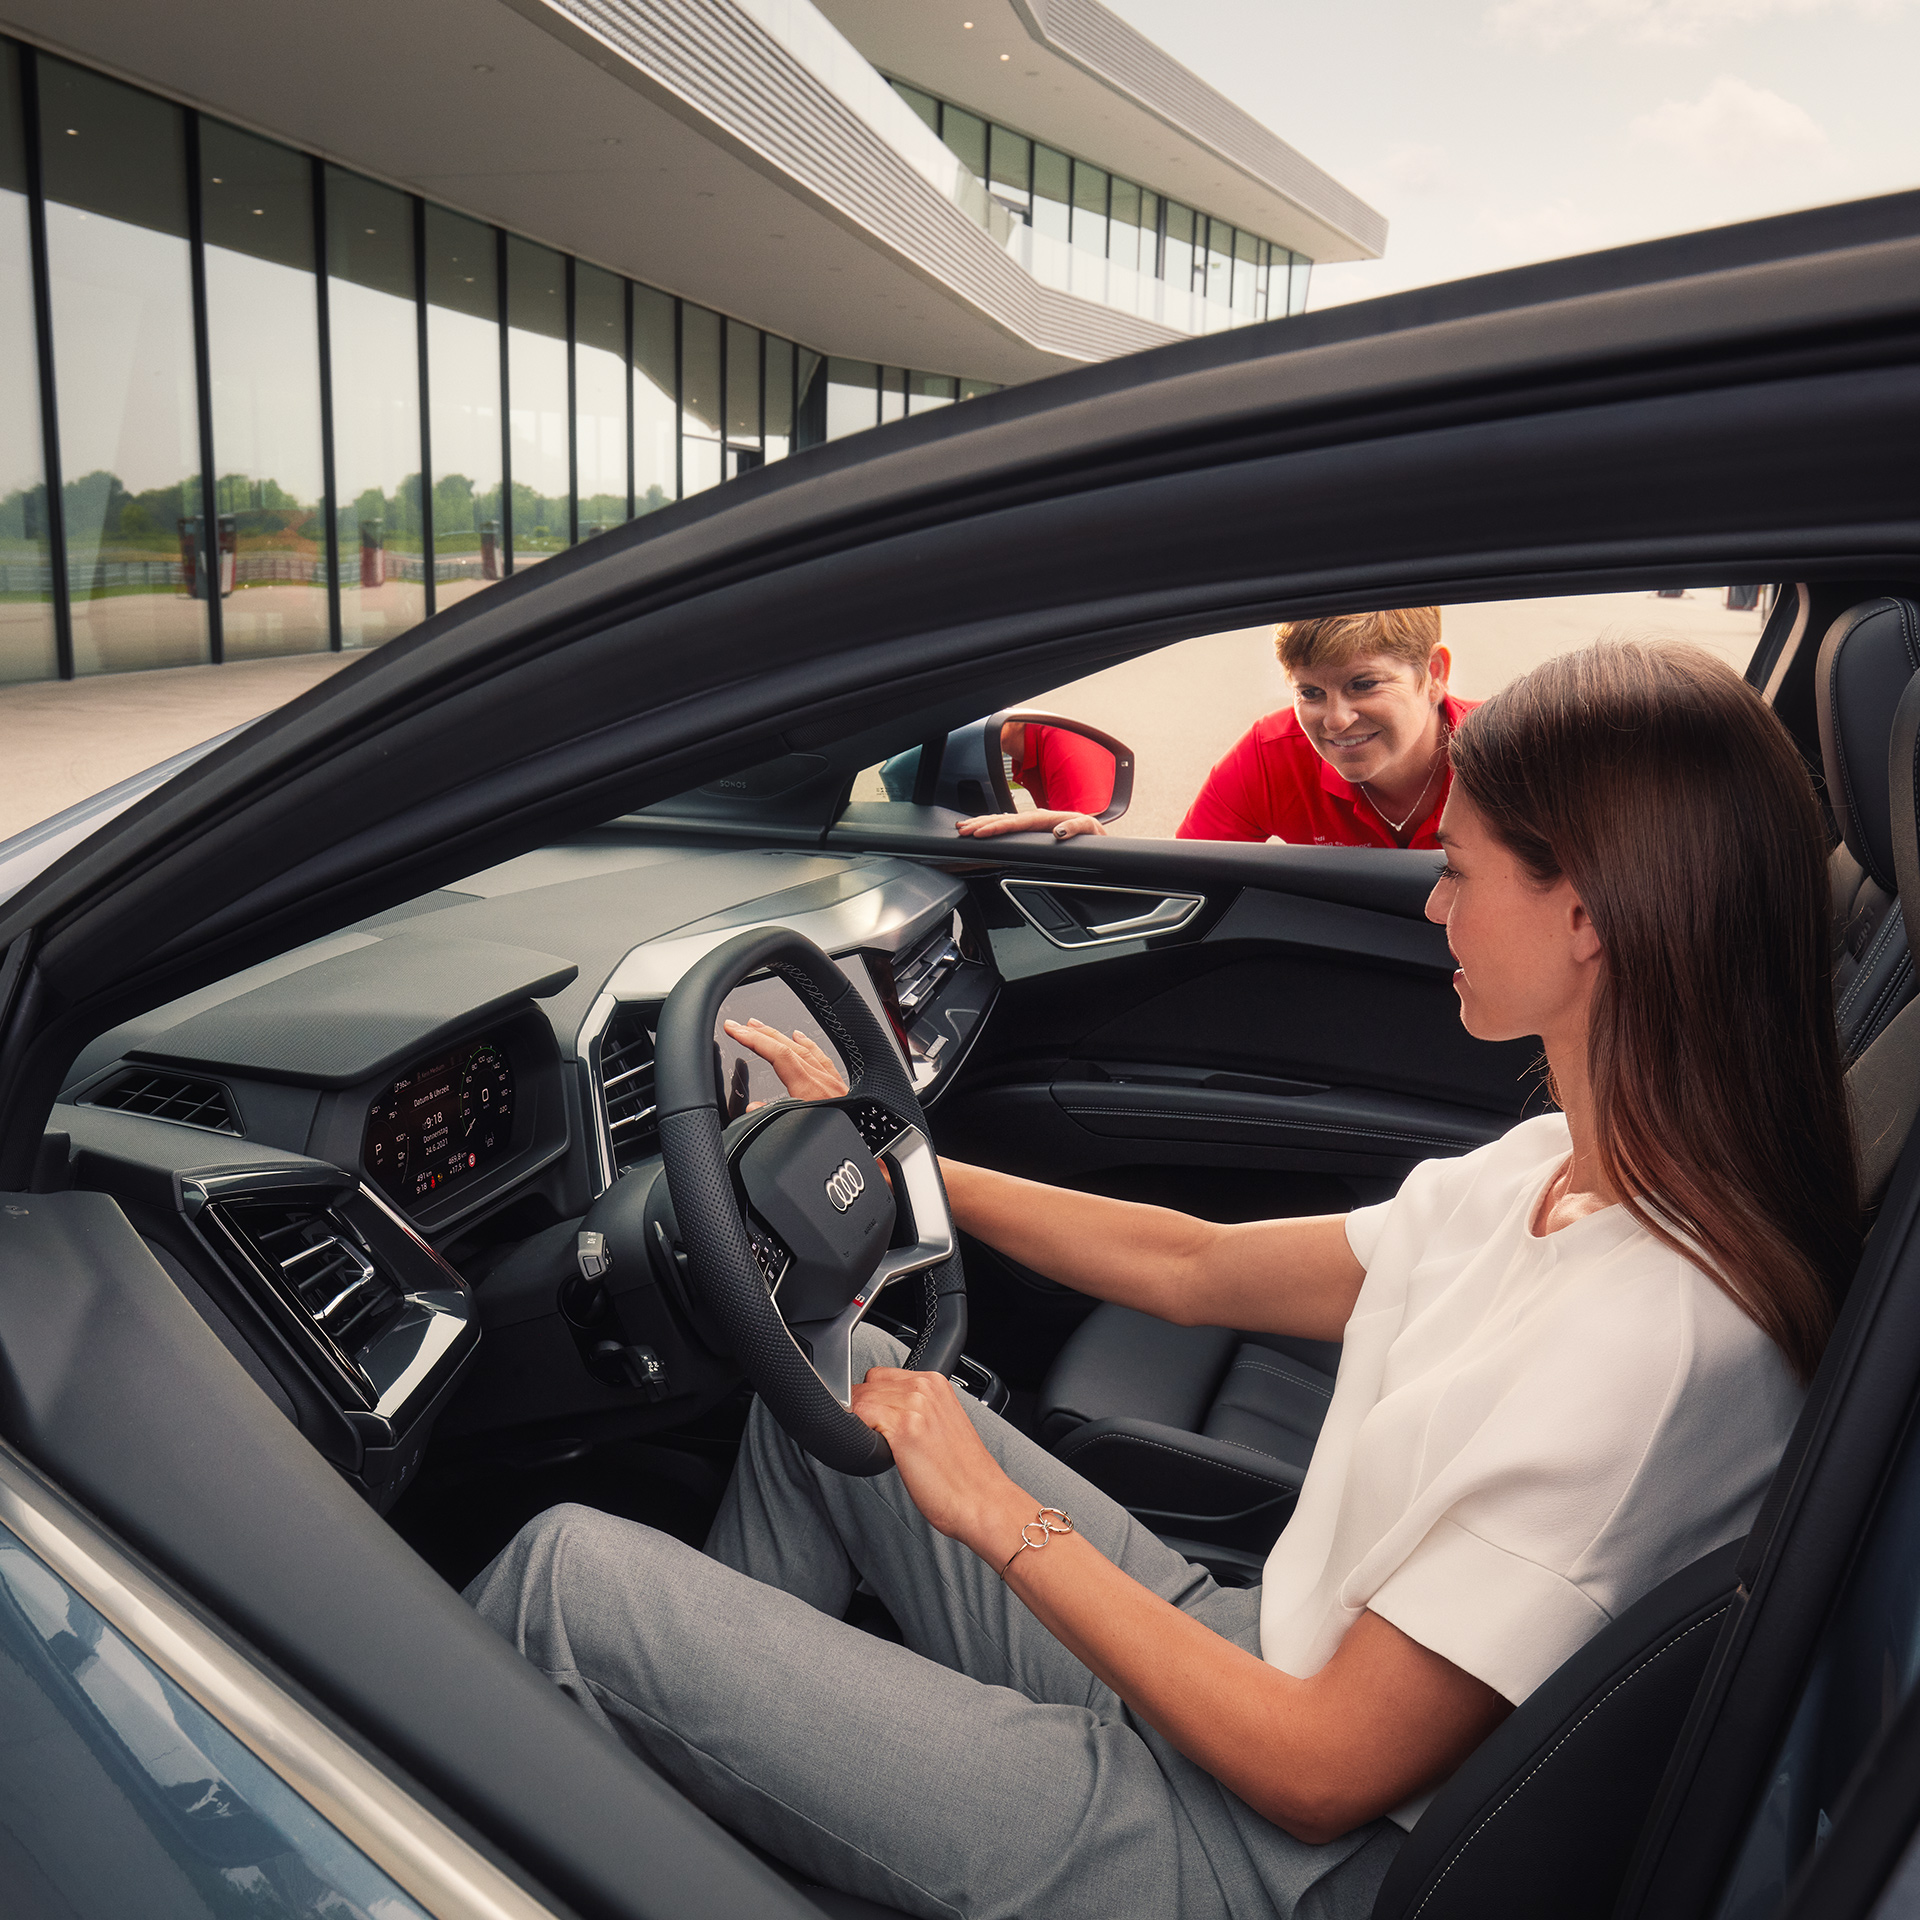 Woman with dark long hair sits in an Audi model, on the passenger side a woman in red t-shirt looks through the window and explains the vehicle